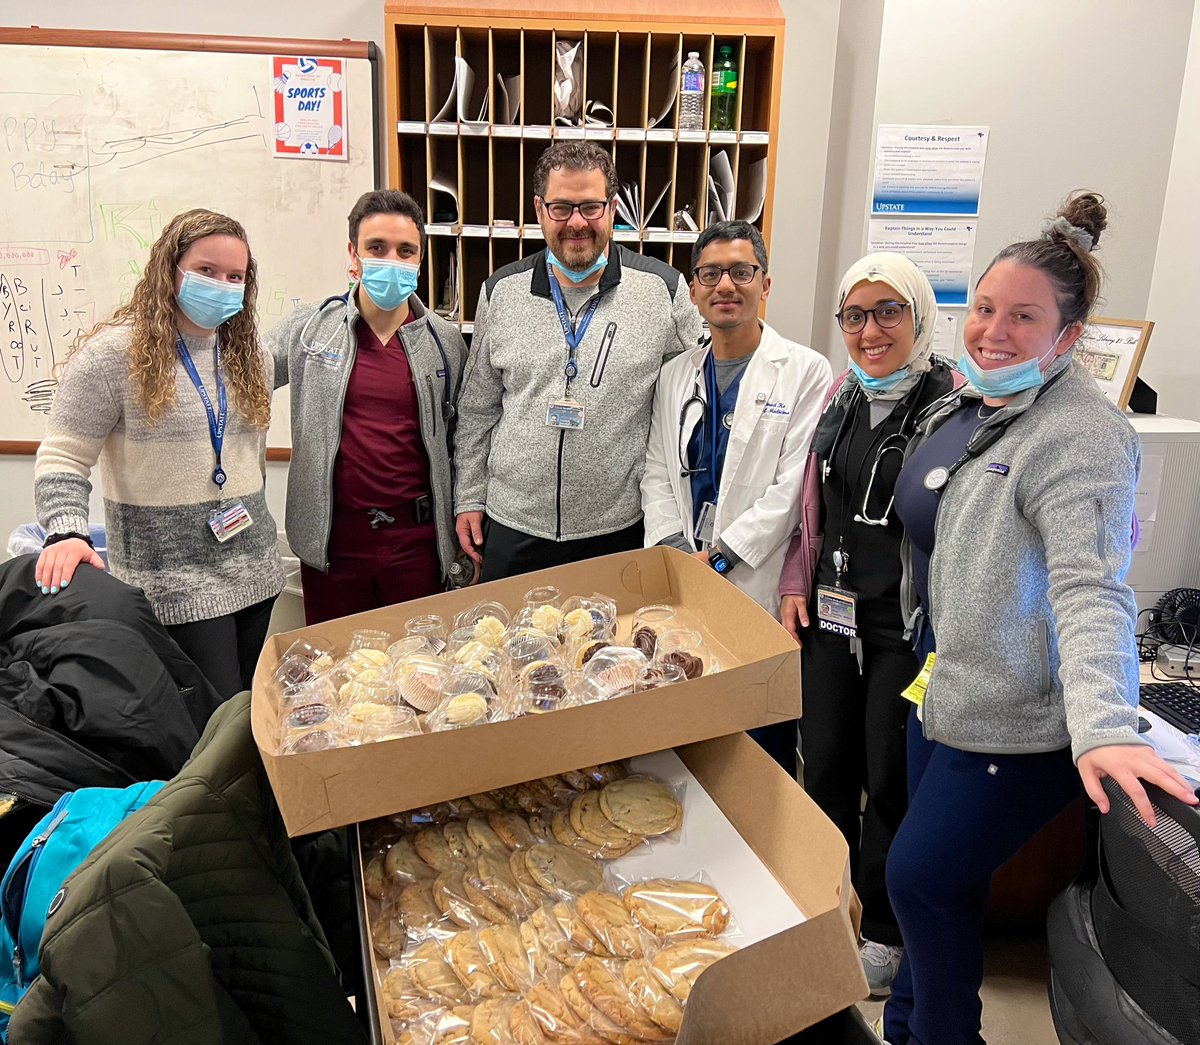 When the Chief Hospitalist brings the Medicine Department cupcakes and cookies 🍪 🧁 🍪 🧁 🍪 🧁 Happy Doctors’ Day ✨🩺✨@UpstateNews @UpstateIM_Res #MedTwitter #DoctorsDay  @MarounBouZerdan